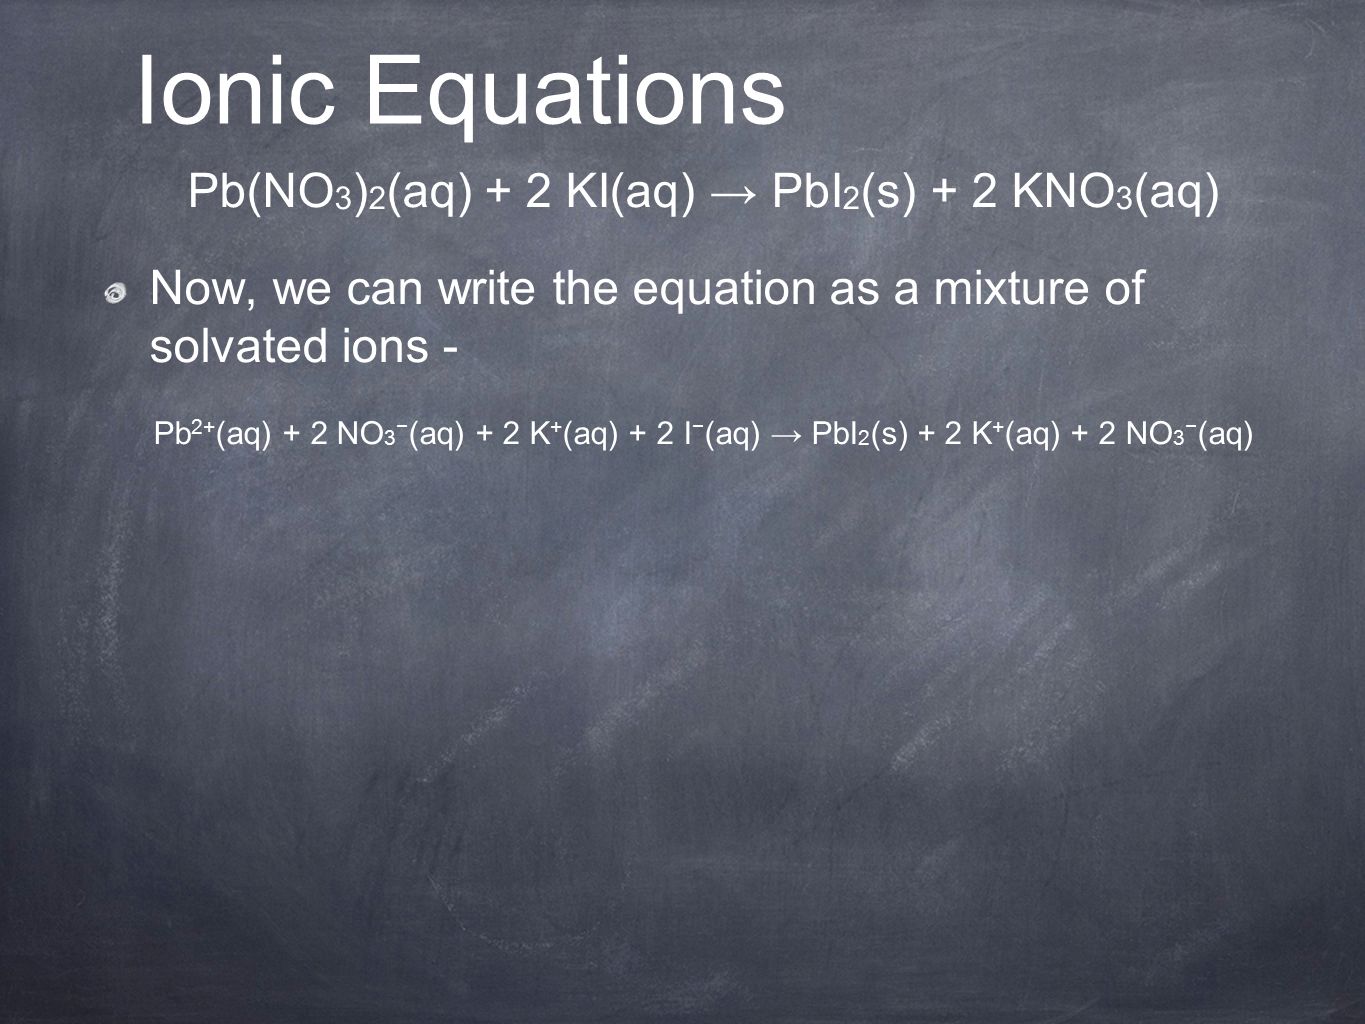 Pb(NO 3 ) 2 (aq) + 2 KI(aq) → PbI 2 (s) + 2 KNO 3 (aq) Now, we can write the equation as a mixture of solvated ions - Pb 2+ (aq) + 2 NO 3 − (aq) + 2 K + (aq) + 2 I − (aq) → PbI 2 (s) + 2 K + (aq) + 2 NO 3 − (aq) Ionic Equations